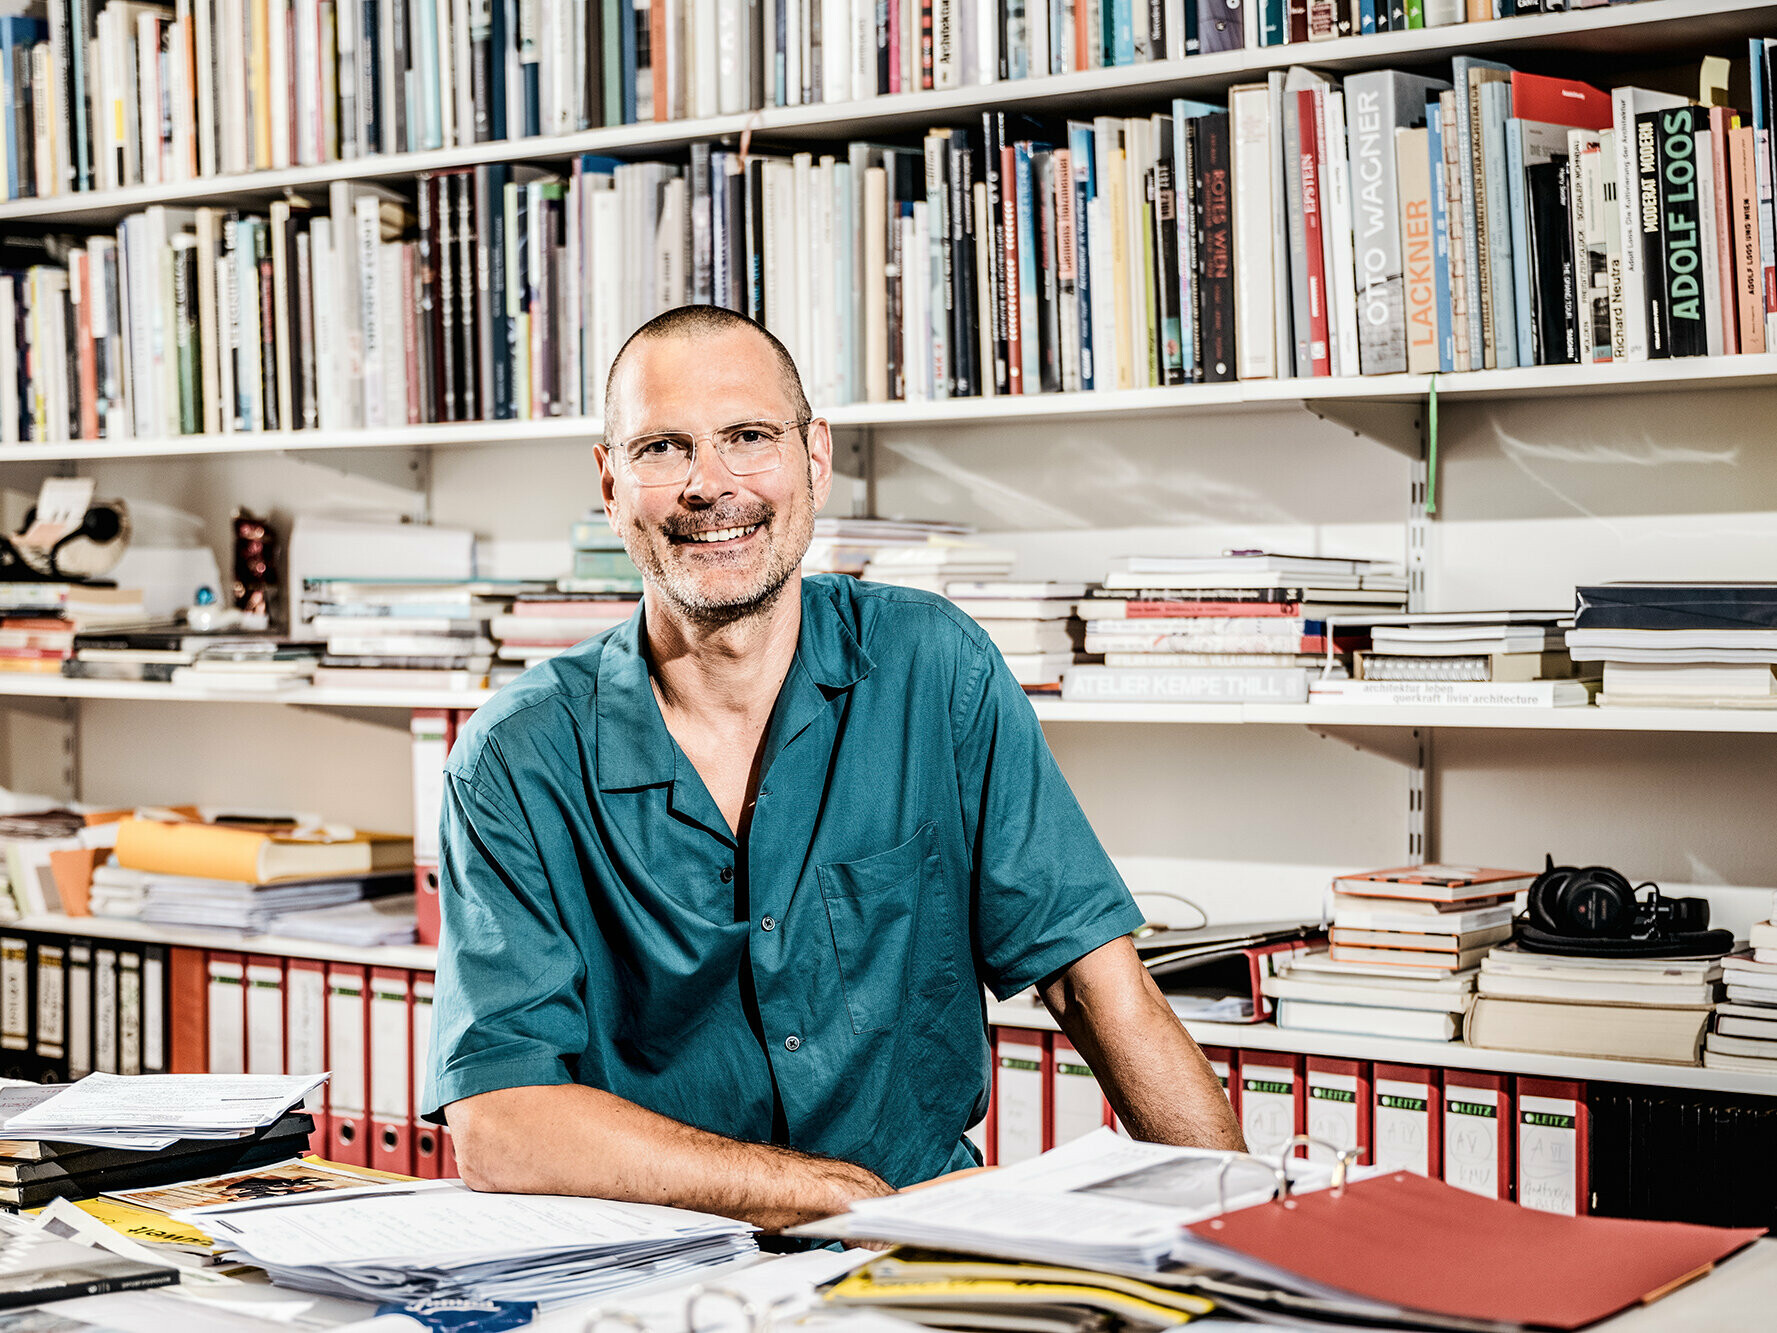 Portrait of architect Eckehart Loidolt in his office room, surrounded by work material and books on a shelf in the background.